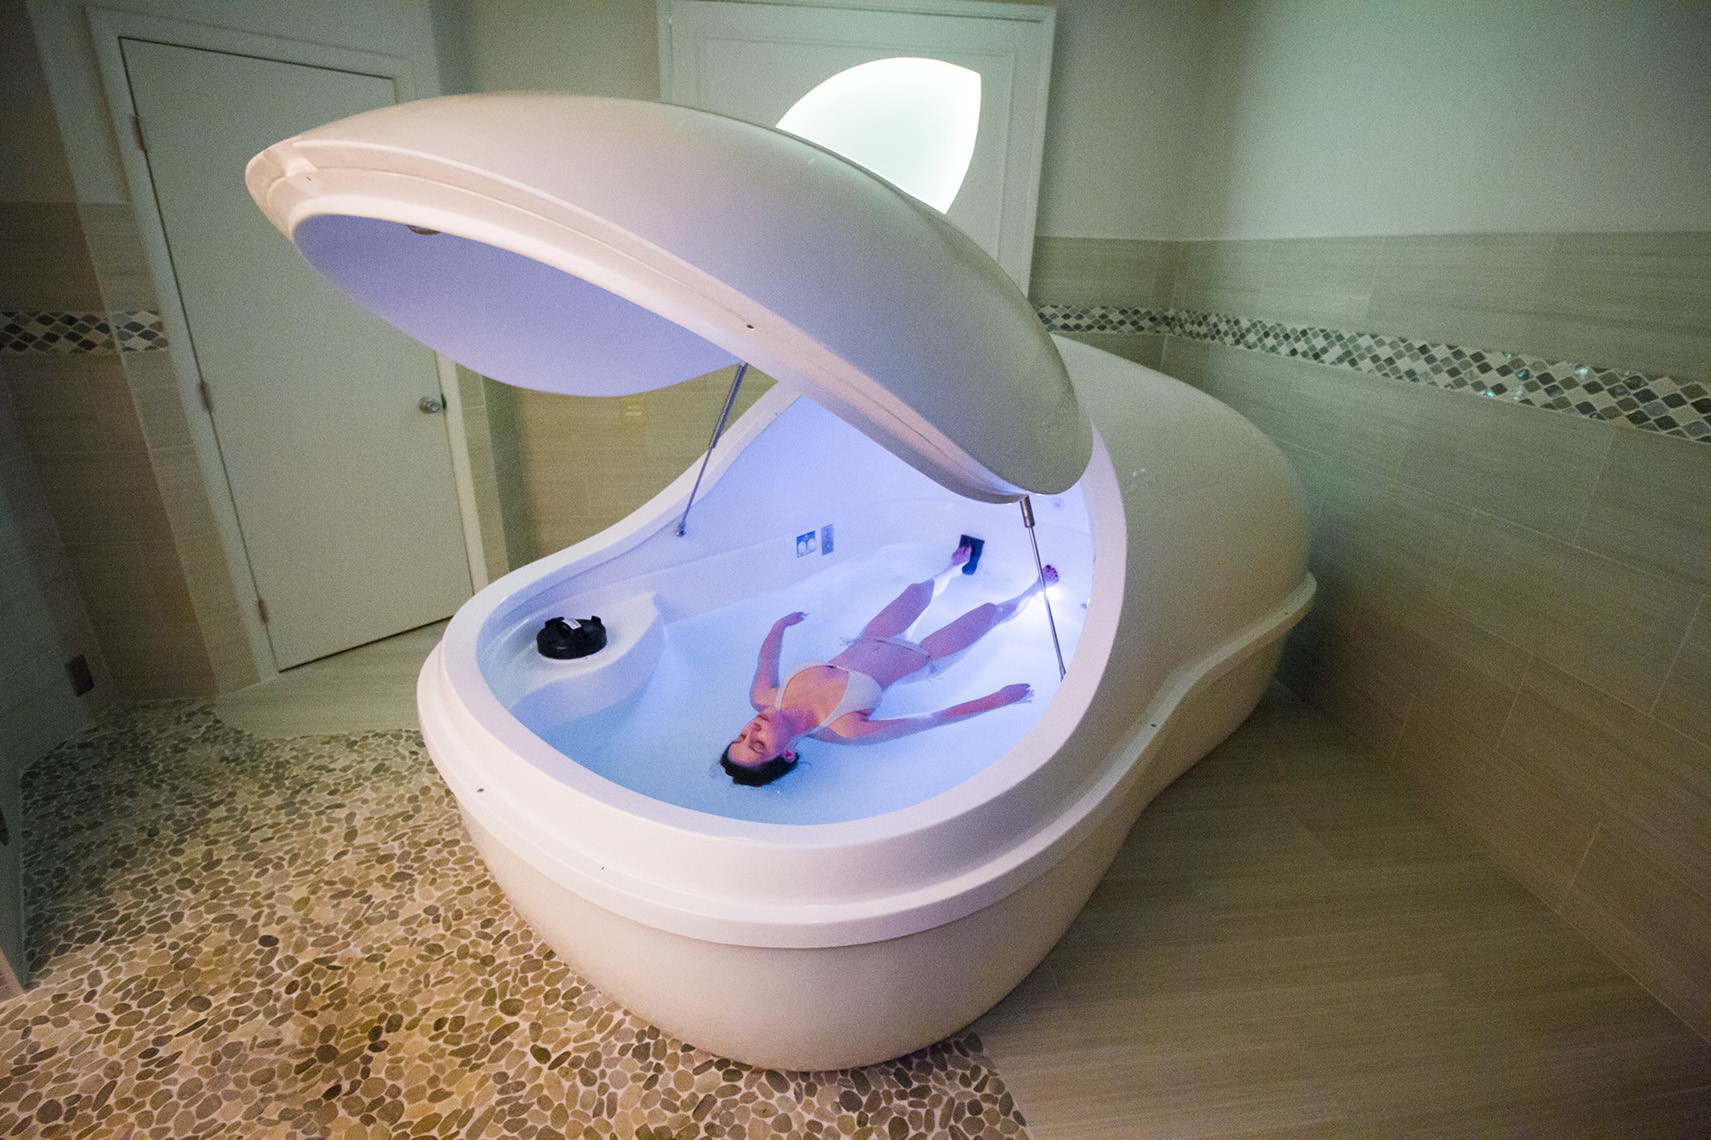 True REST Float Spa, Friday, September 20, 2019, Press release picture